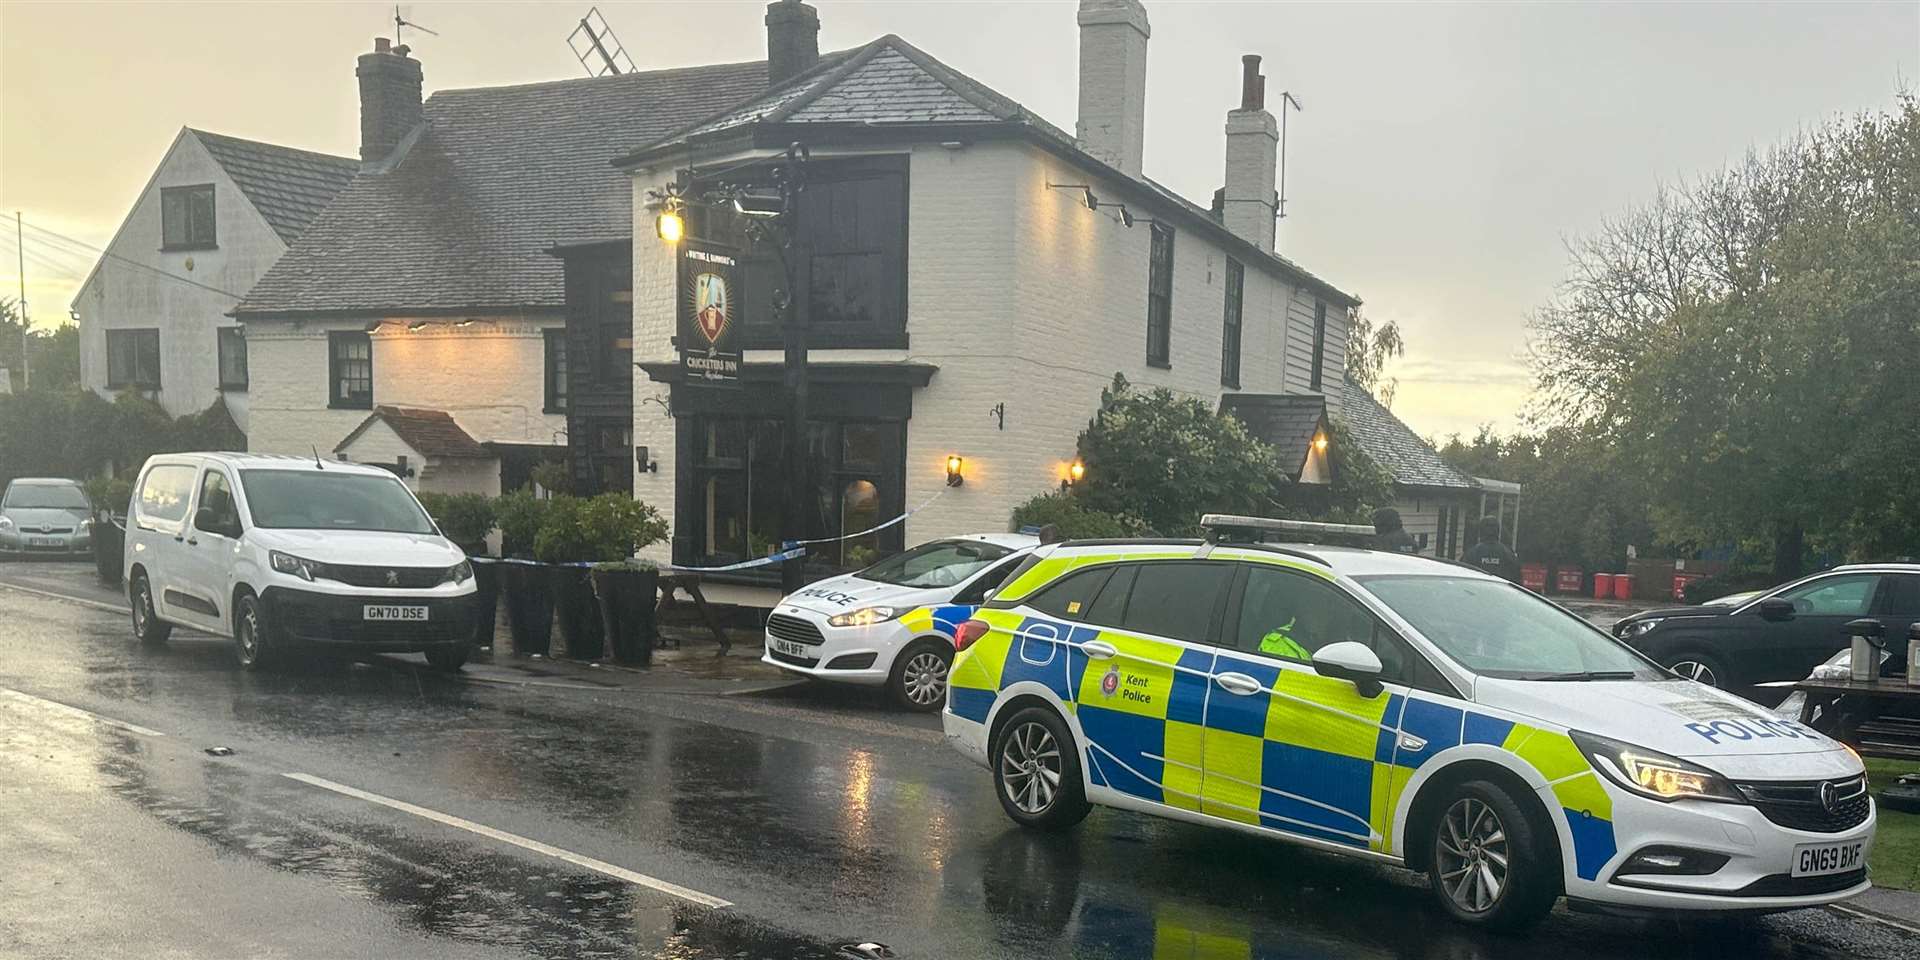 Police at the Cricketers Inn pub in Meopham where Craig Allen was killed.Miguel Batista, known as Alex Batista, is on trial accused of trying to murder pub landlord David Brown.Picture: UKNIP